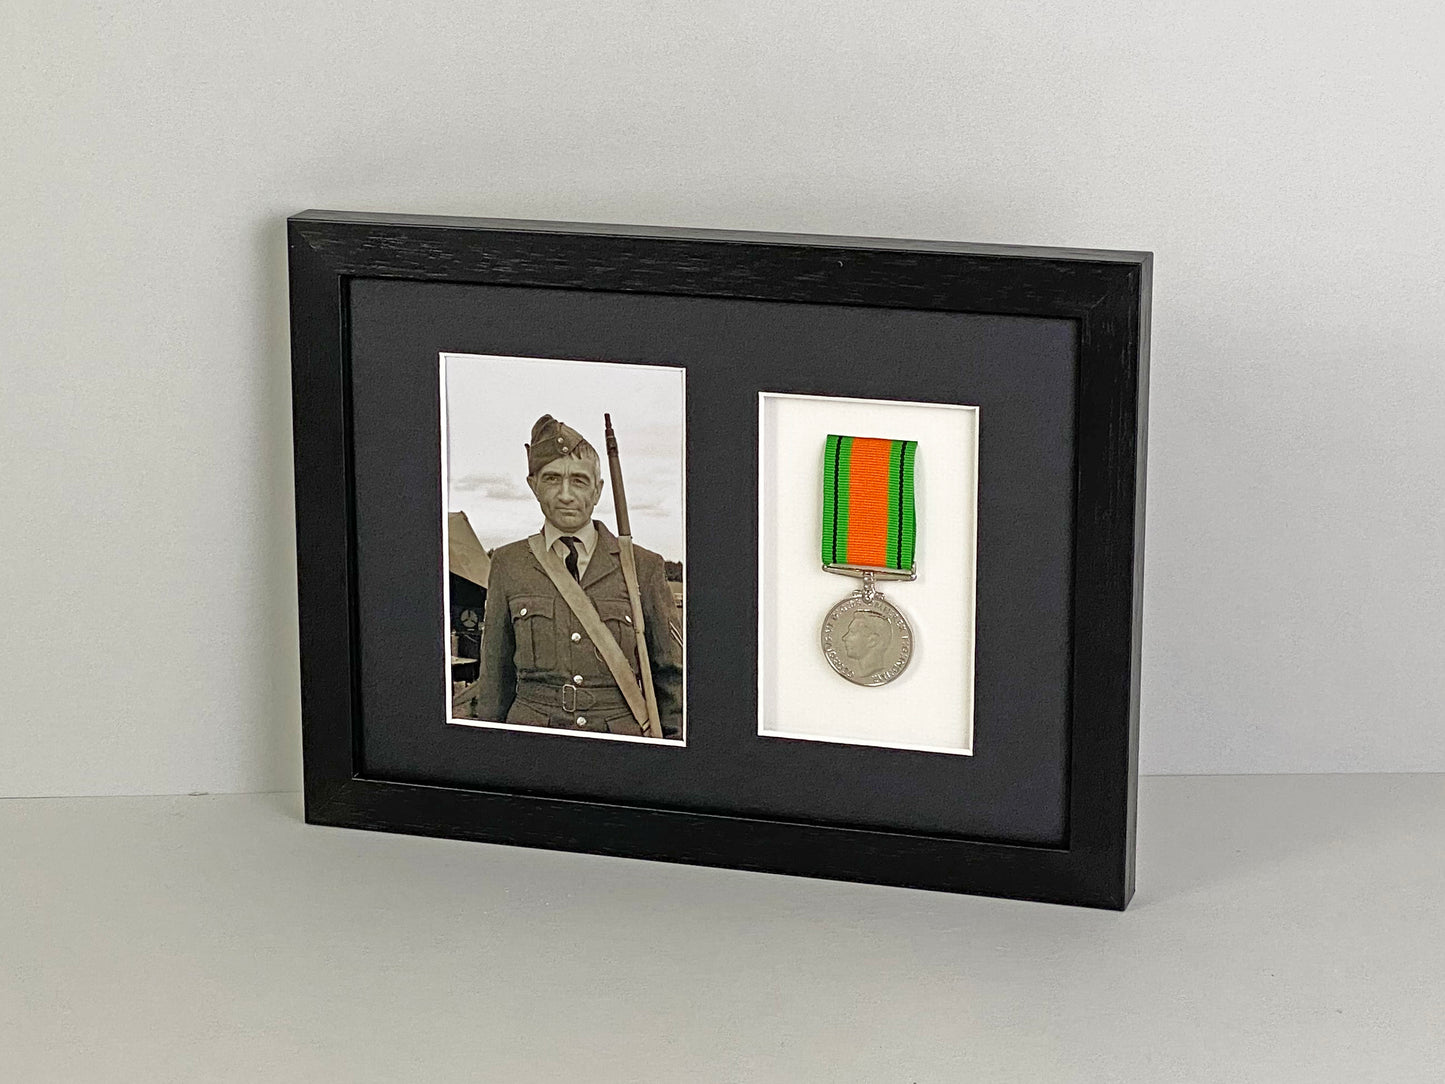 Military and Service Medal display Frame for One Medal and a 6x4" Photograph.